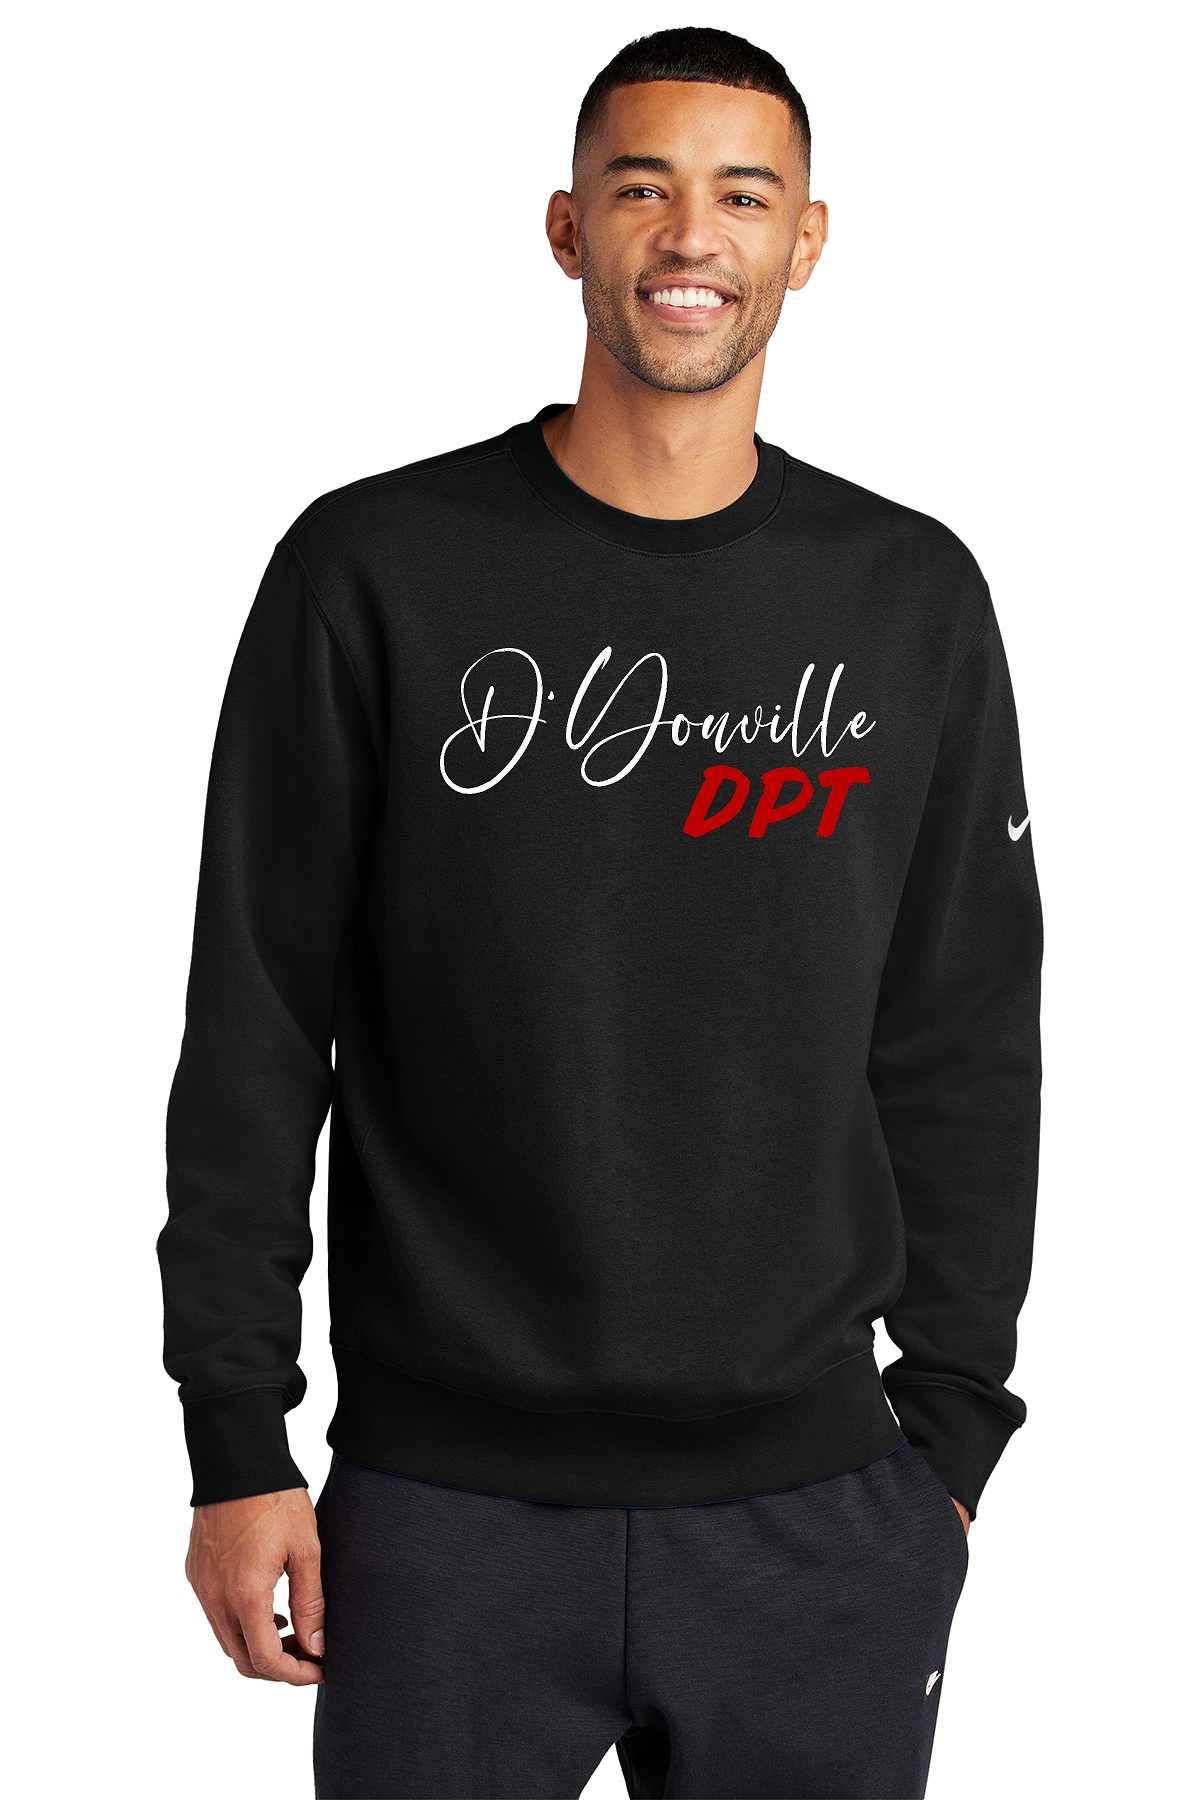 D'Youville Physical Therapy NKFD9863NEW Nike Club Fleece Sleeve Swoosh Crew